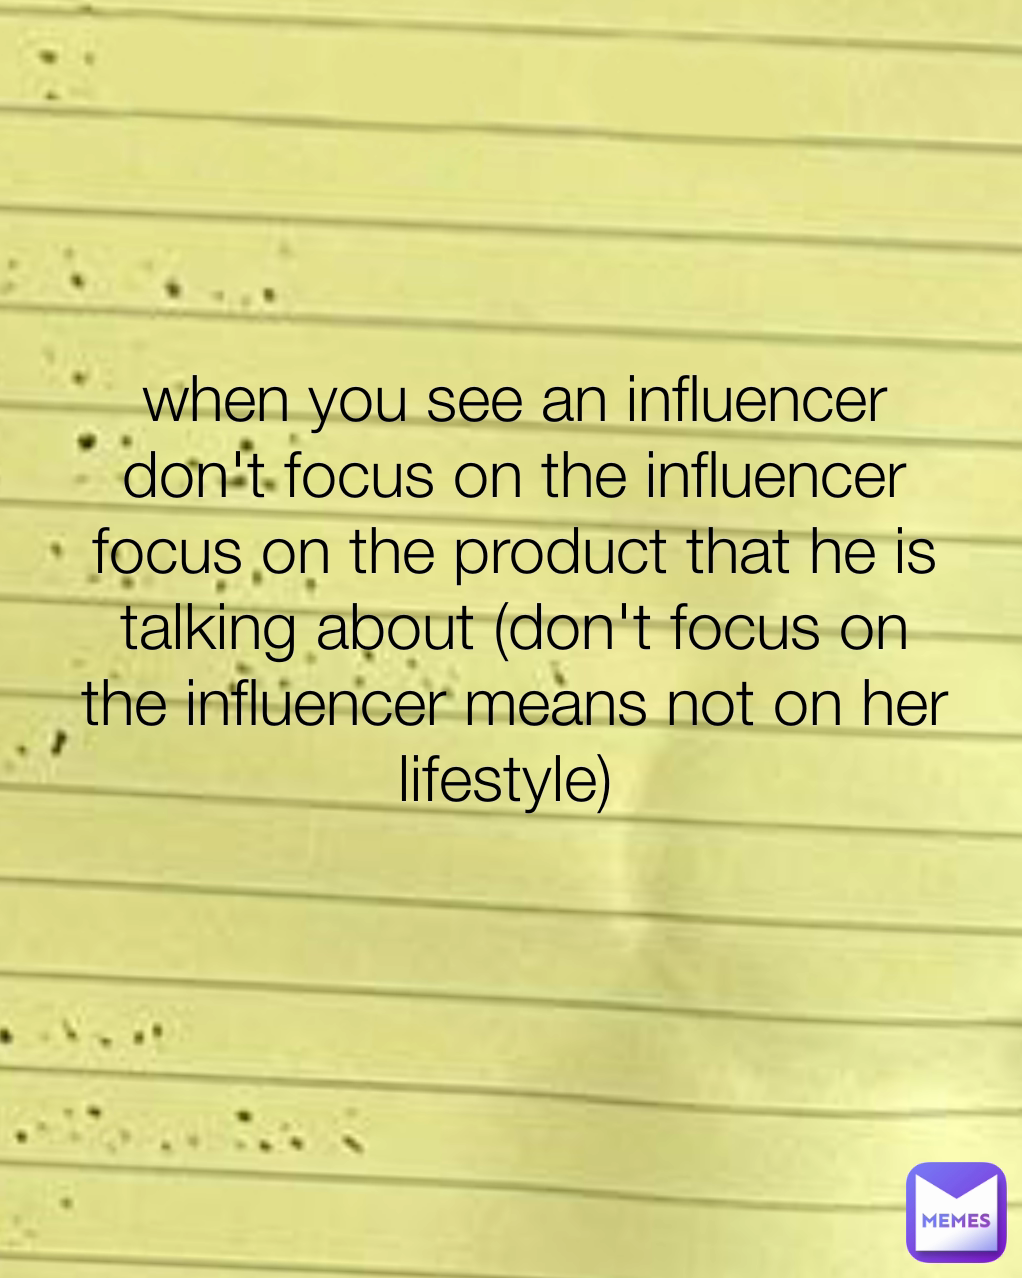 when you see an influencer don't focus on the influencer focus on the product that he is talking about (don't focus on the influencer means not on her lifestyle) 